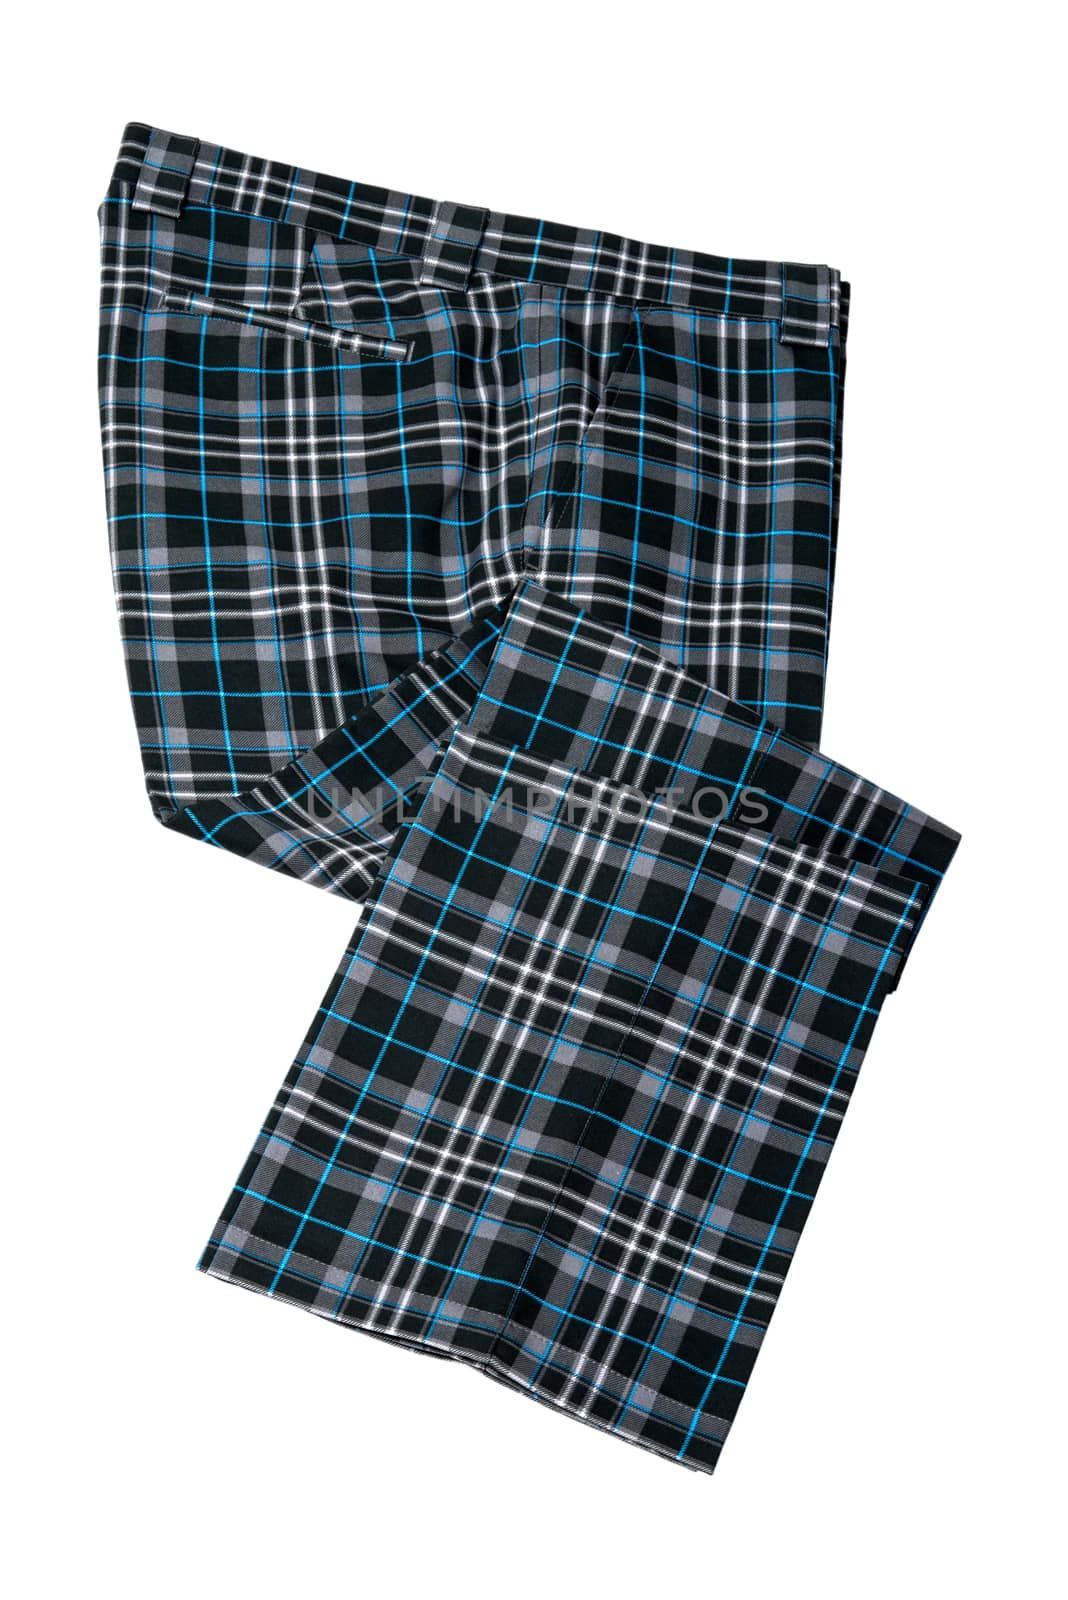 Scotland pants, trousers for man on white background